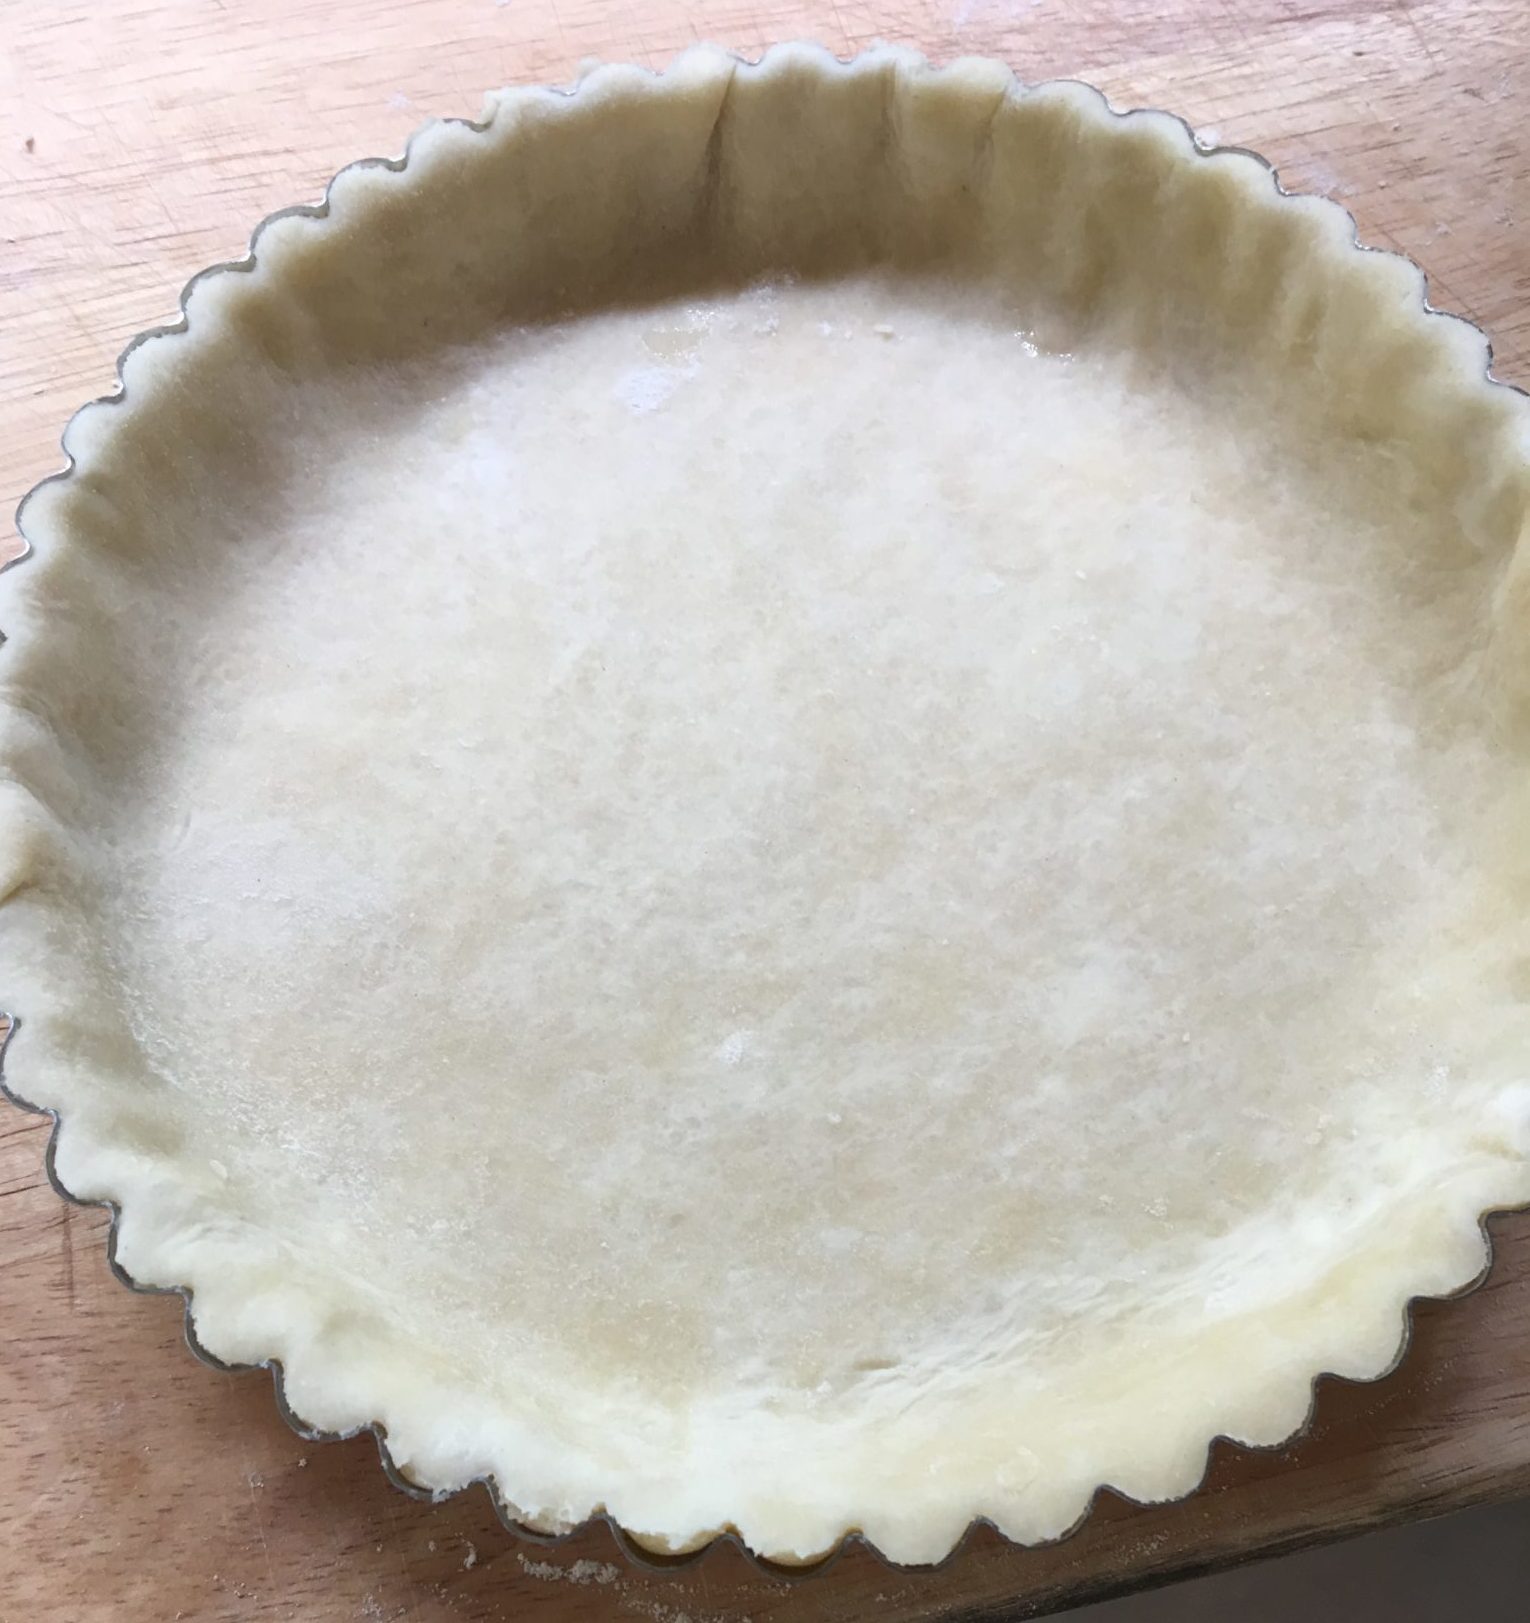 Tart pan with pastry